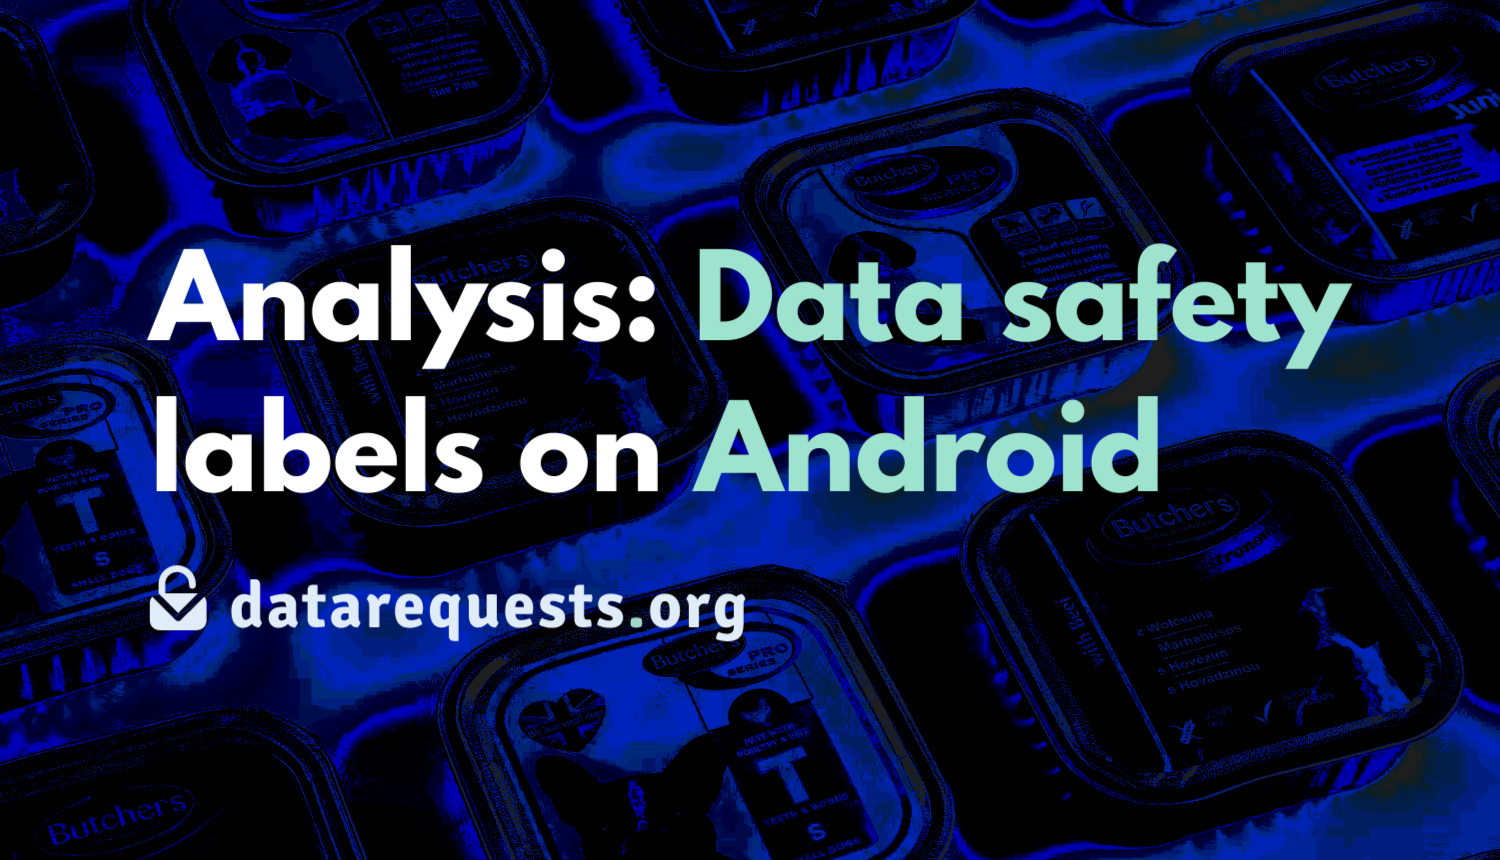 Worrying confessions: A look at data safety labels on Android